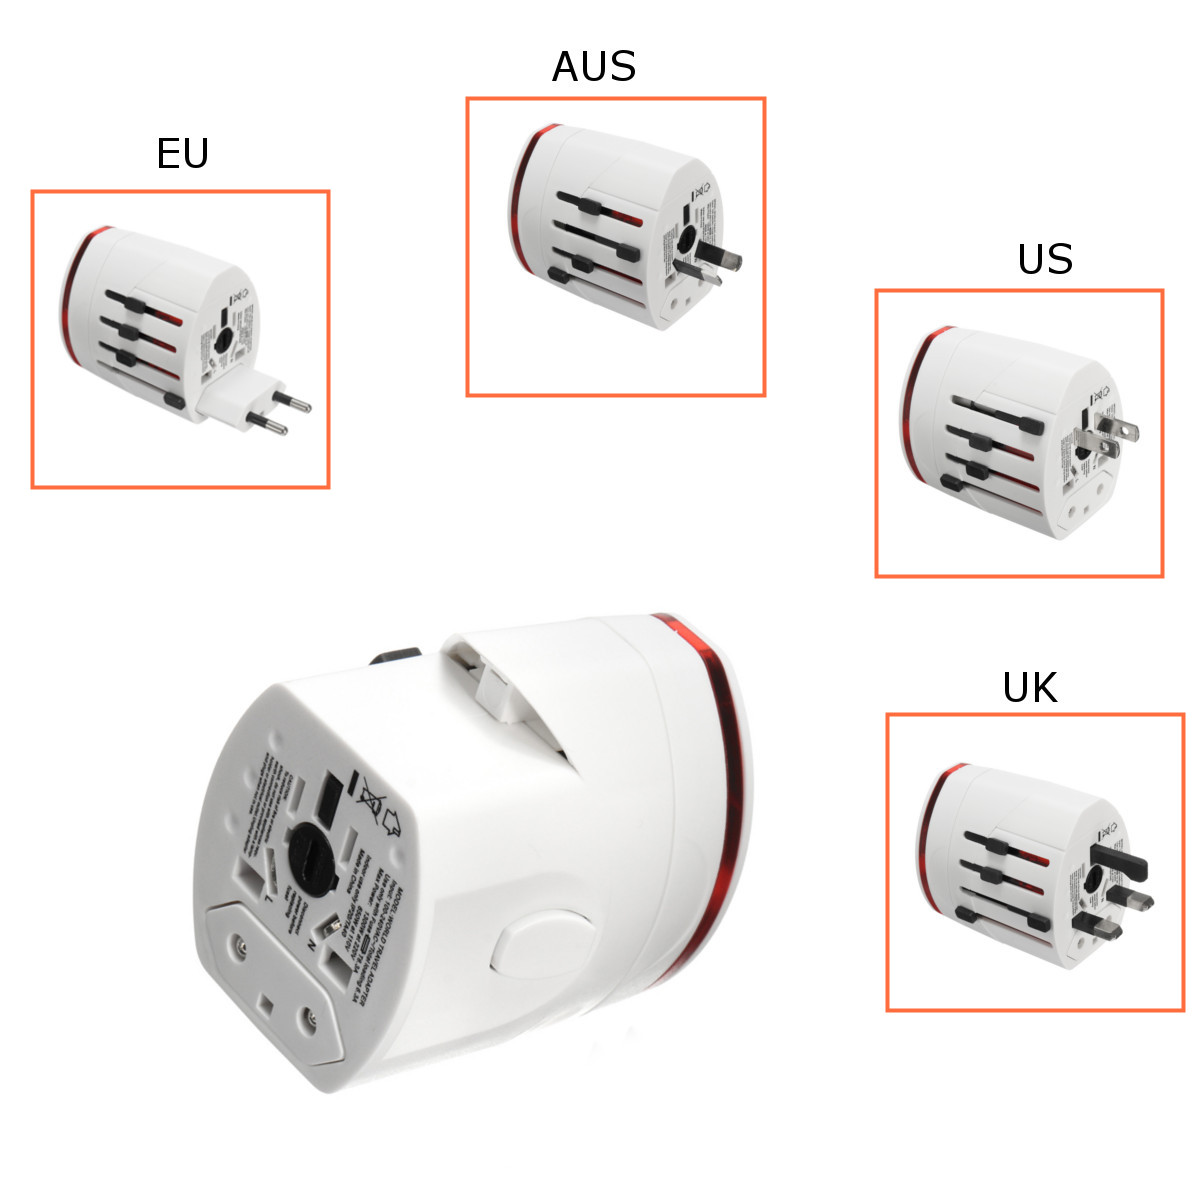 Universal-Travel-AC-Power-Charger-Adapter-Converter-AUUKUSEU-Plug-with-2-USB-Ports-1289576-3